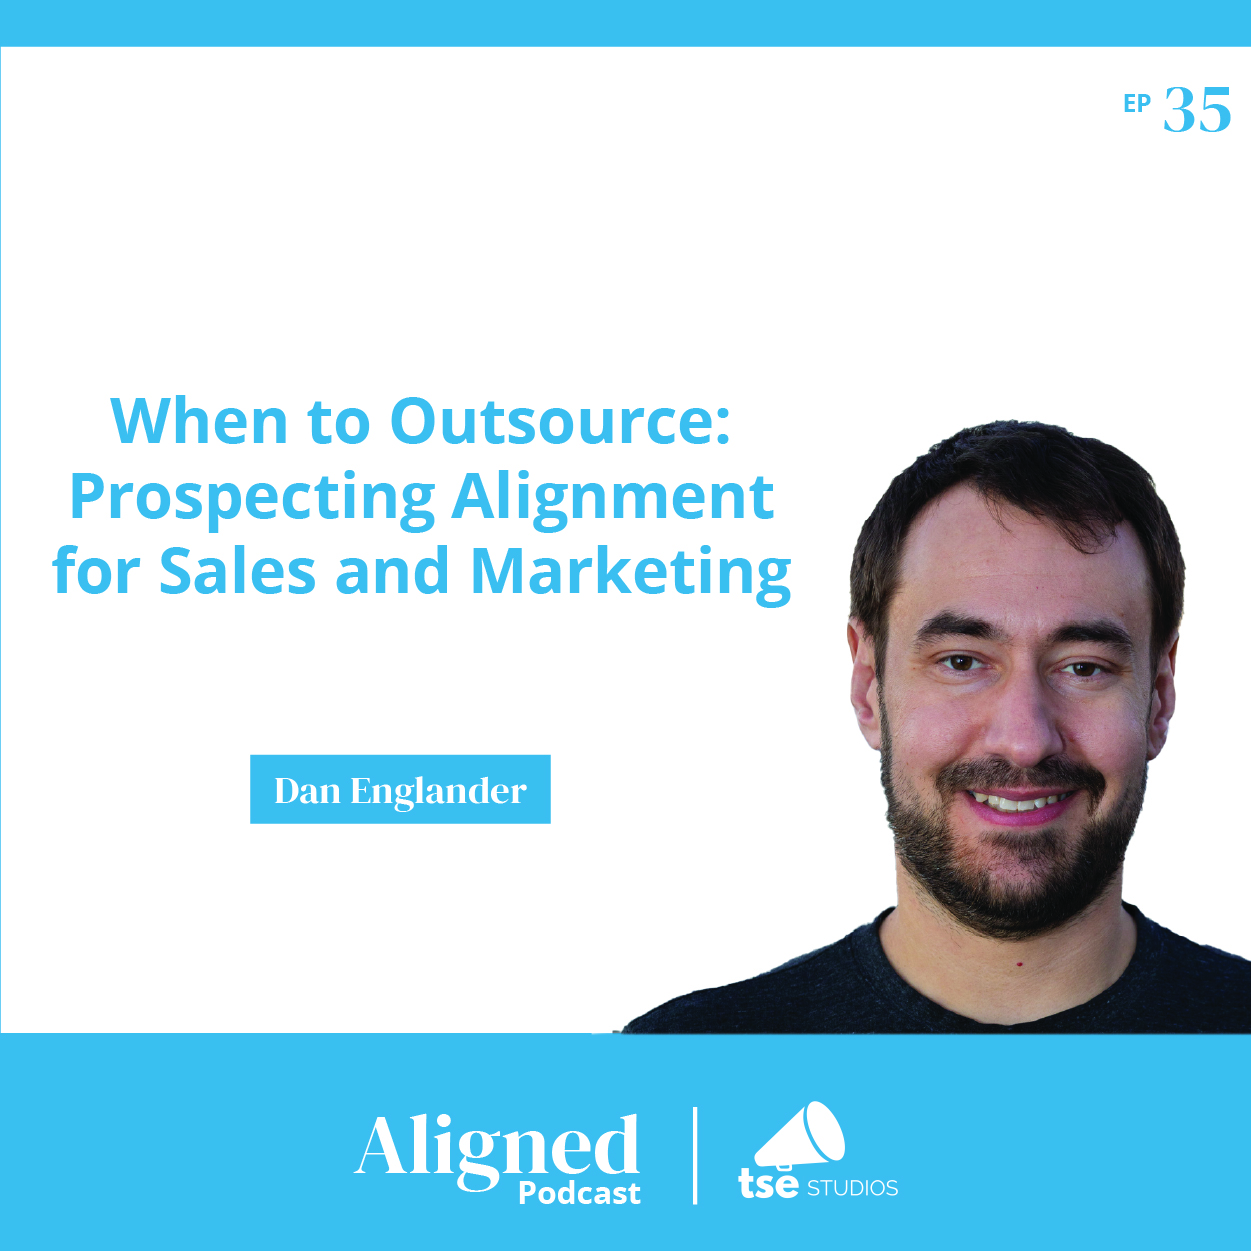 When to Outsource: Prospecting Alignment for Sales and Marketing